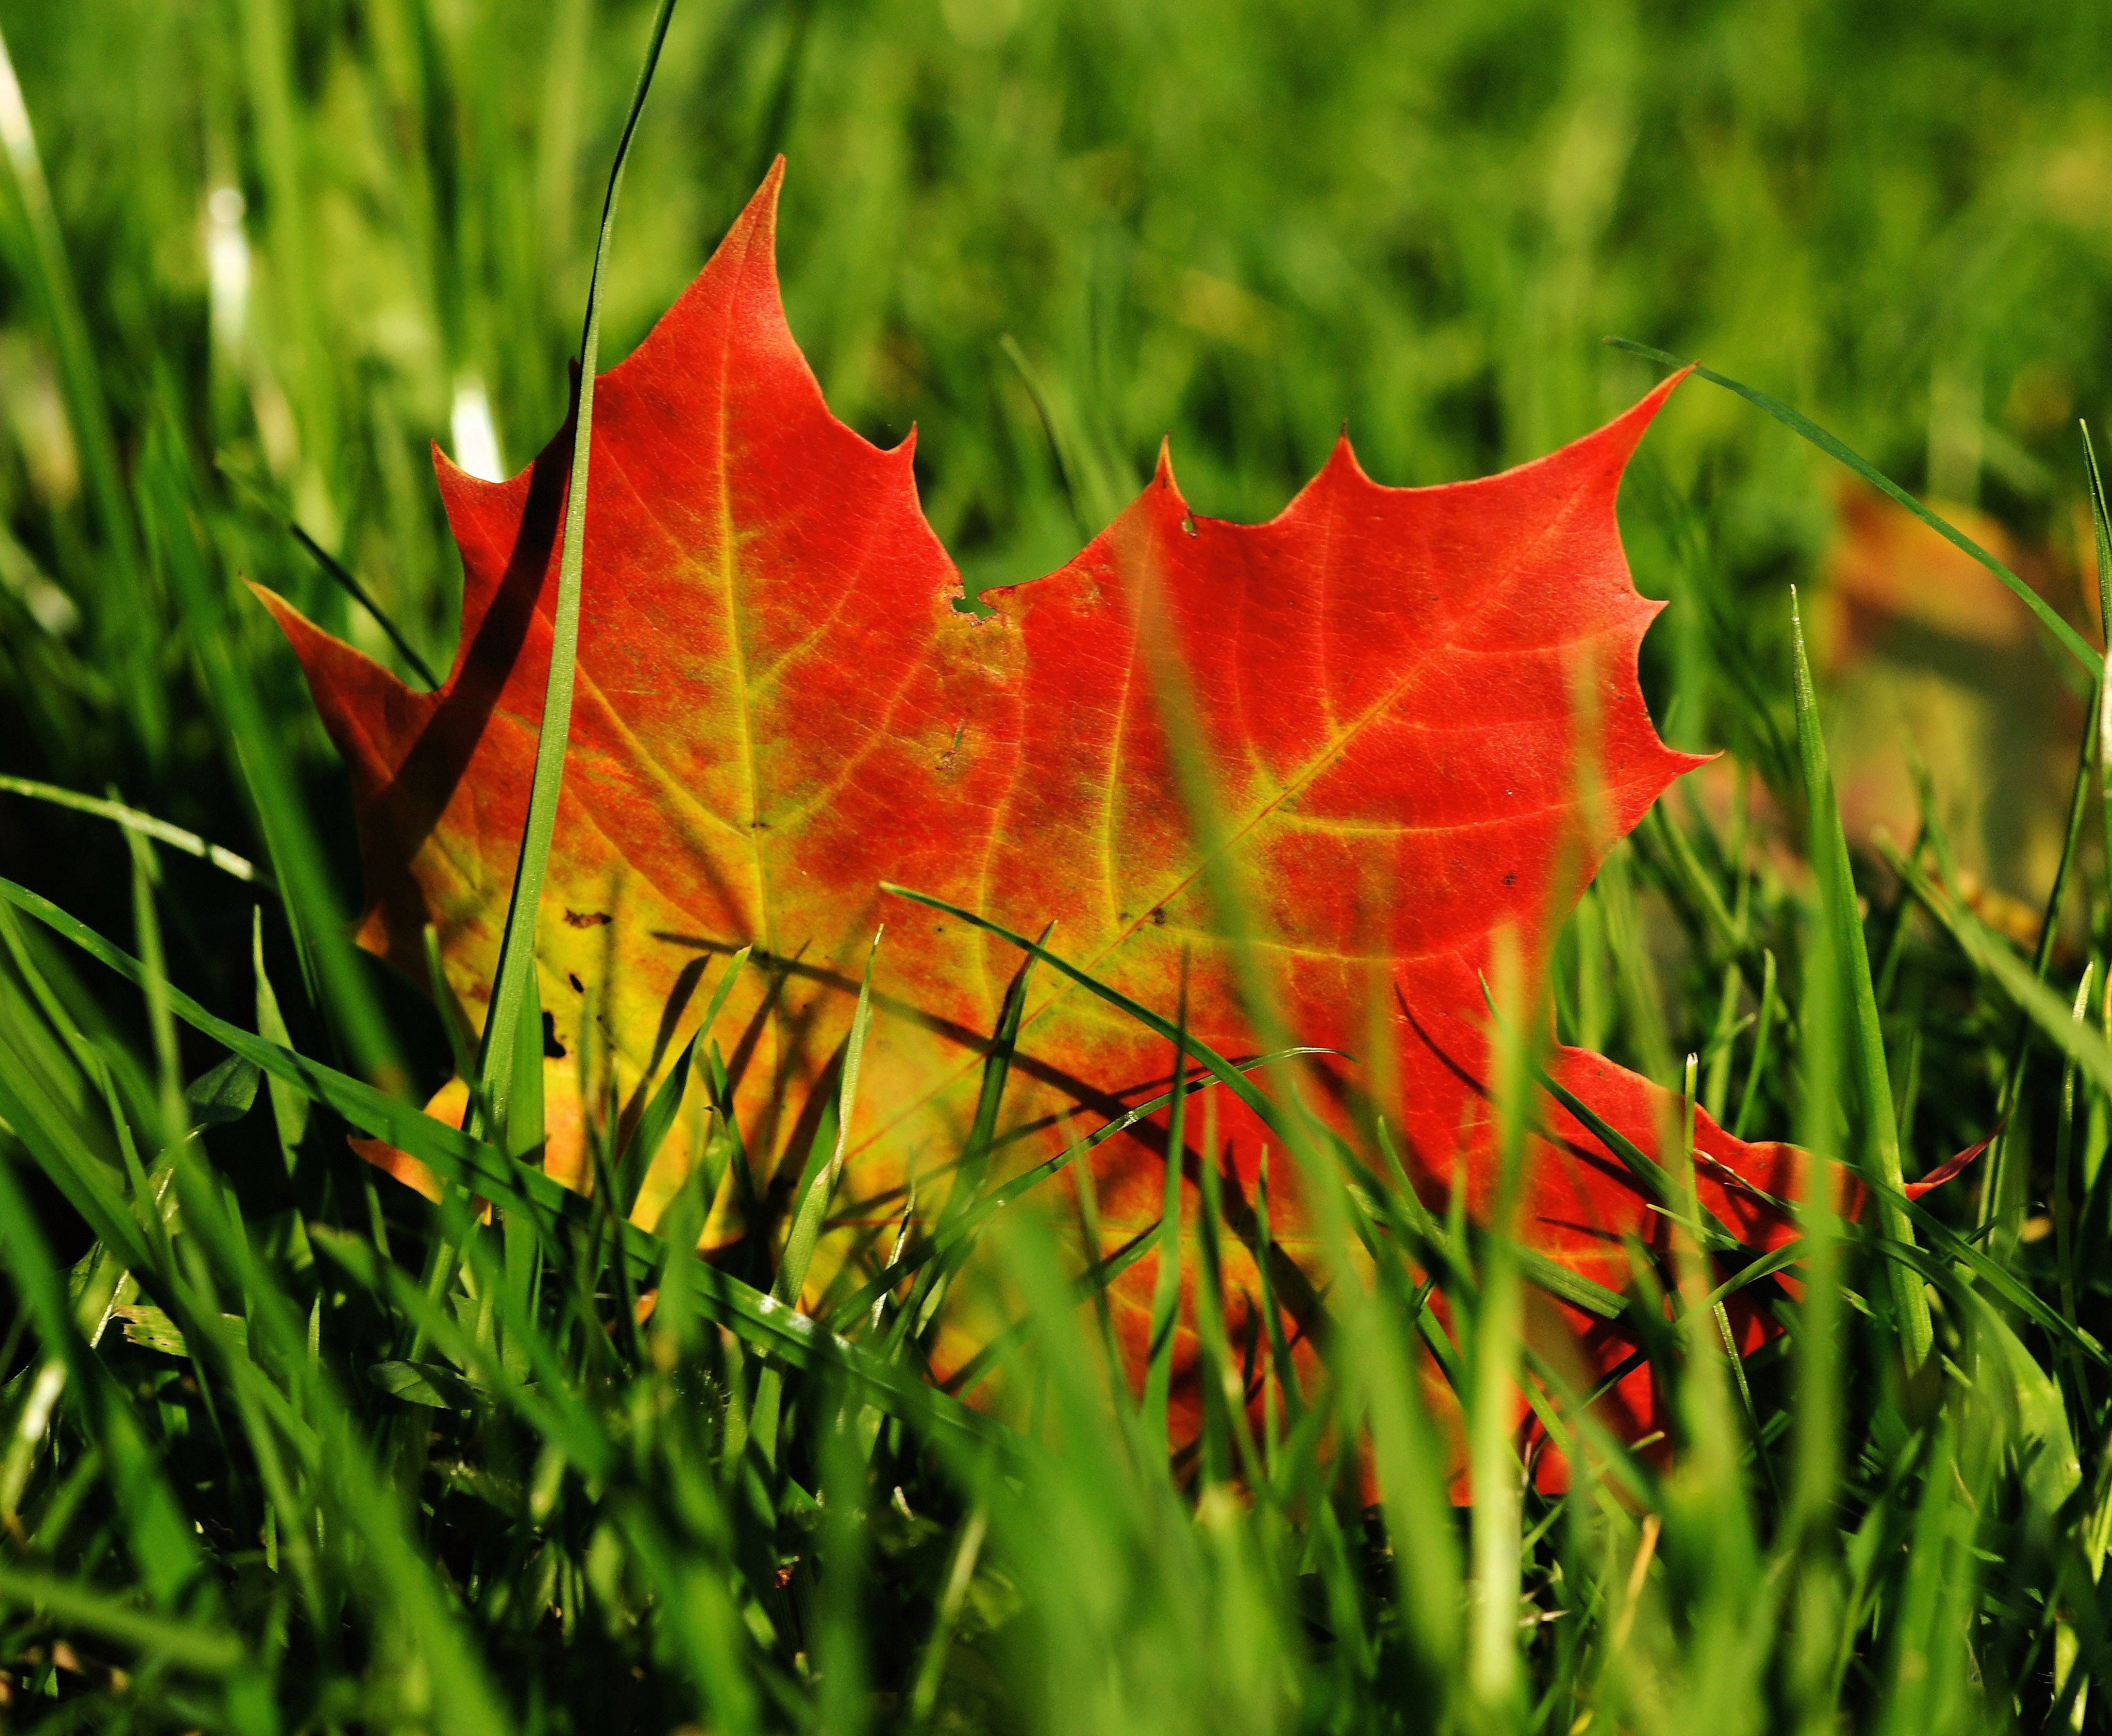 A fallen red leaf lies on the green lawn